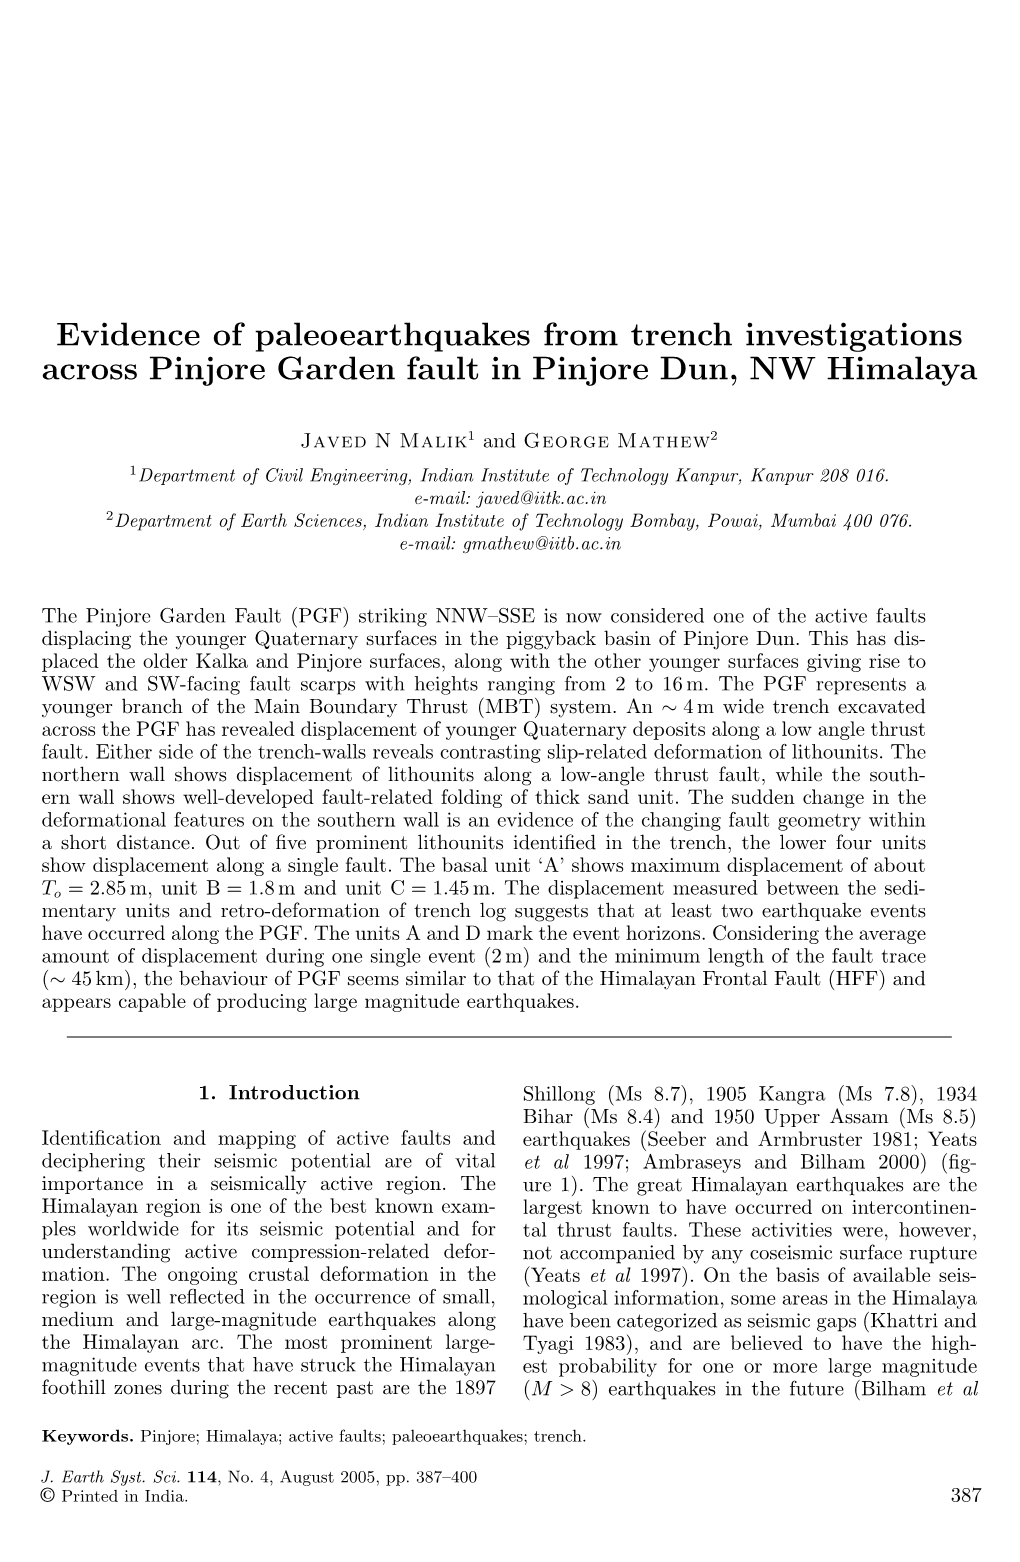 Evidence of Paleoearthquakes from Trench Investigations Across Pinjore Garden Fault in Pinjore Dun, NW Himalaya